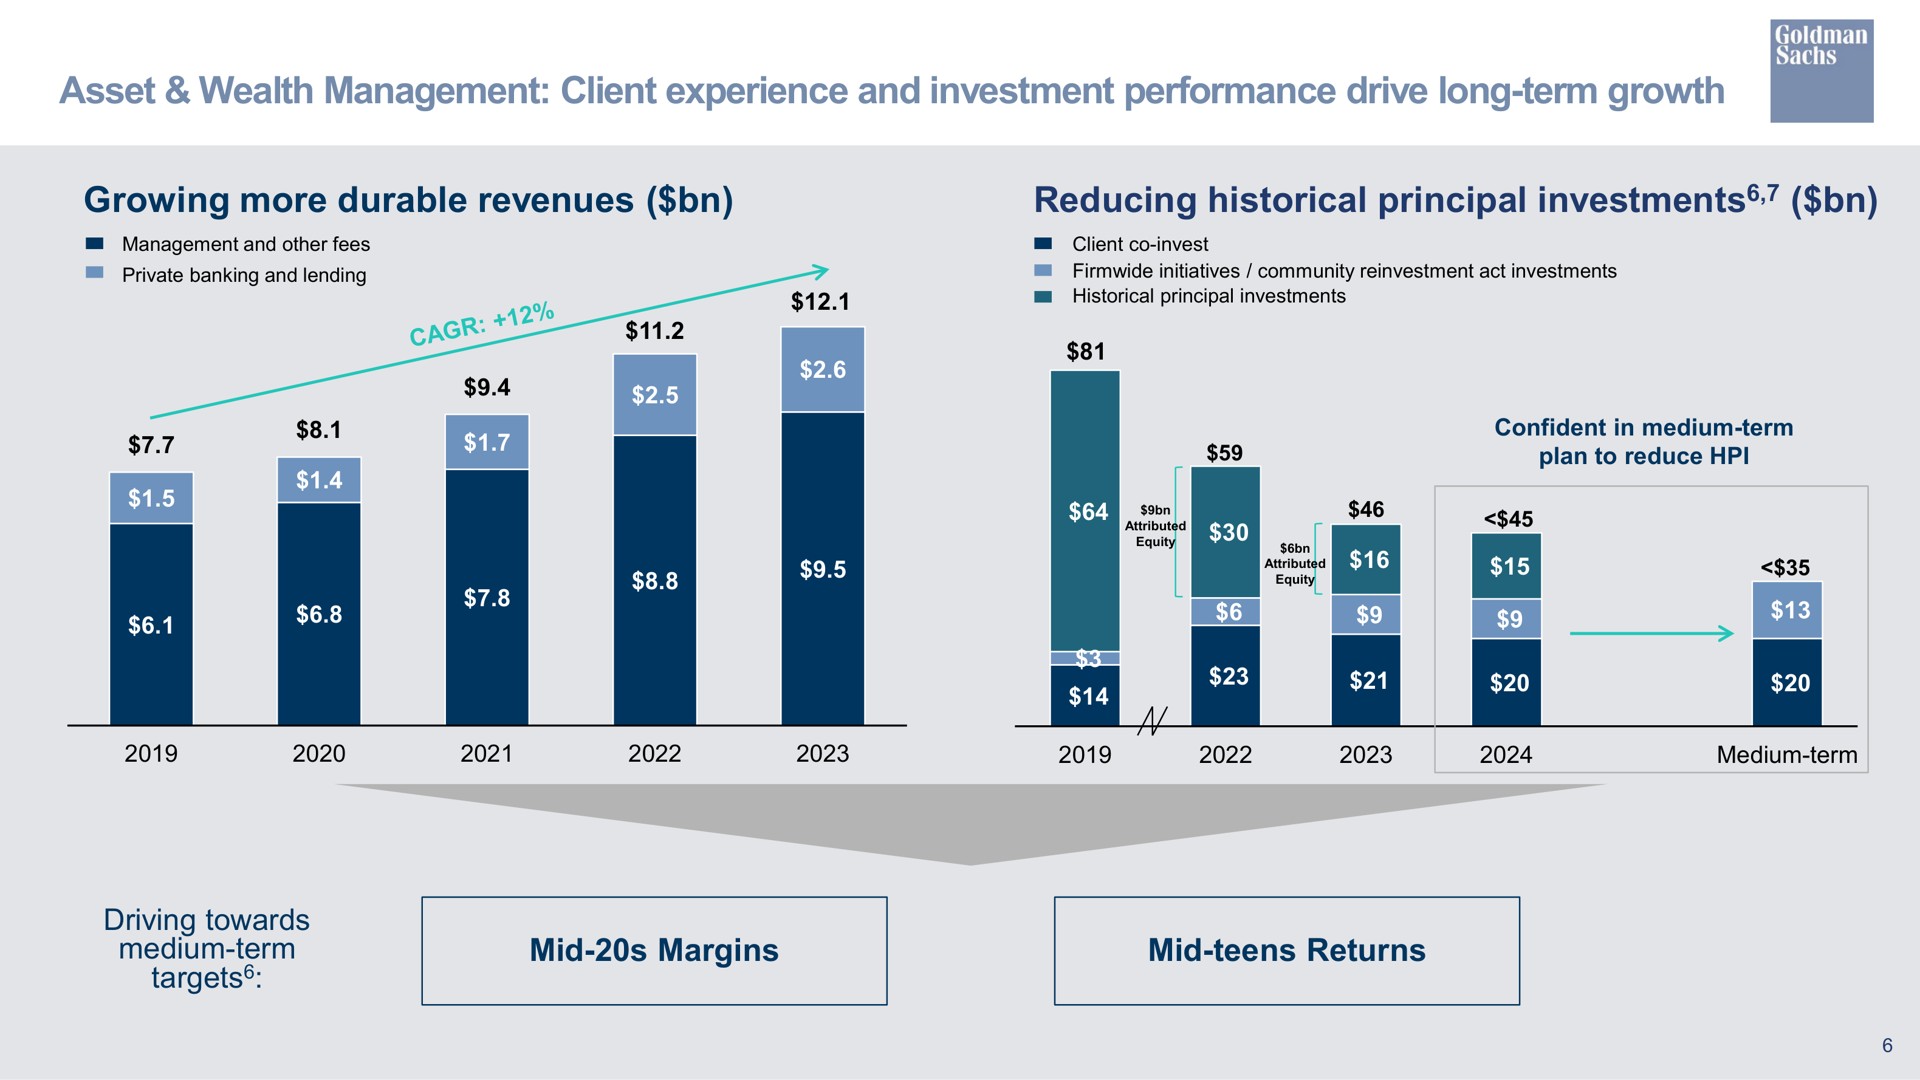 asset wealth management client experience and investment performance drive long term growth growing more durable revenues reducing historical principal investments driving towards medium term targets mid margins mid teens returns investments psi targets | Goldman Sachs